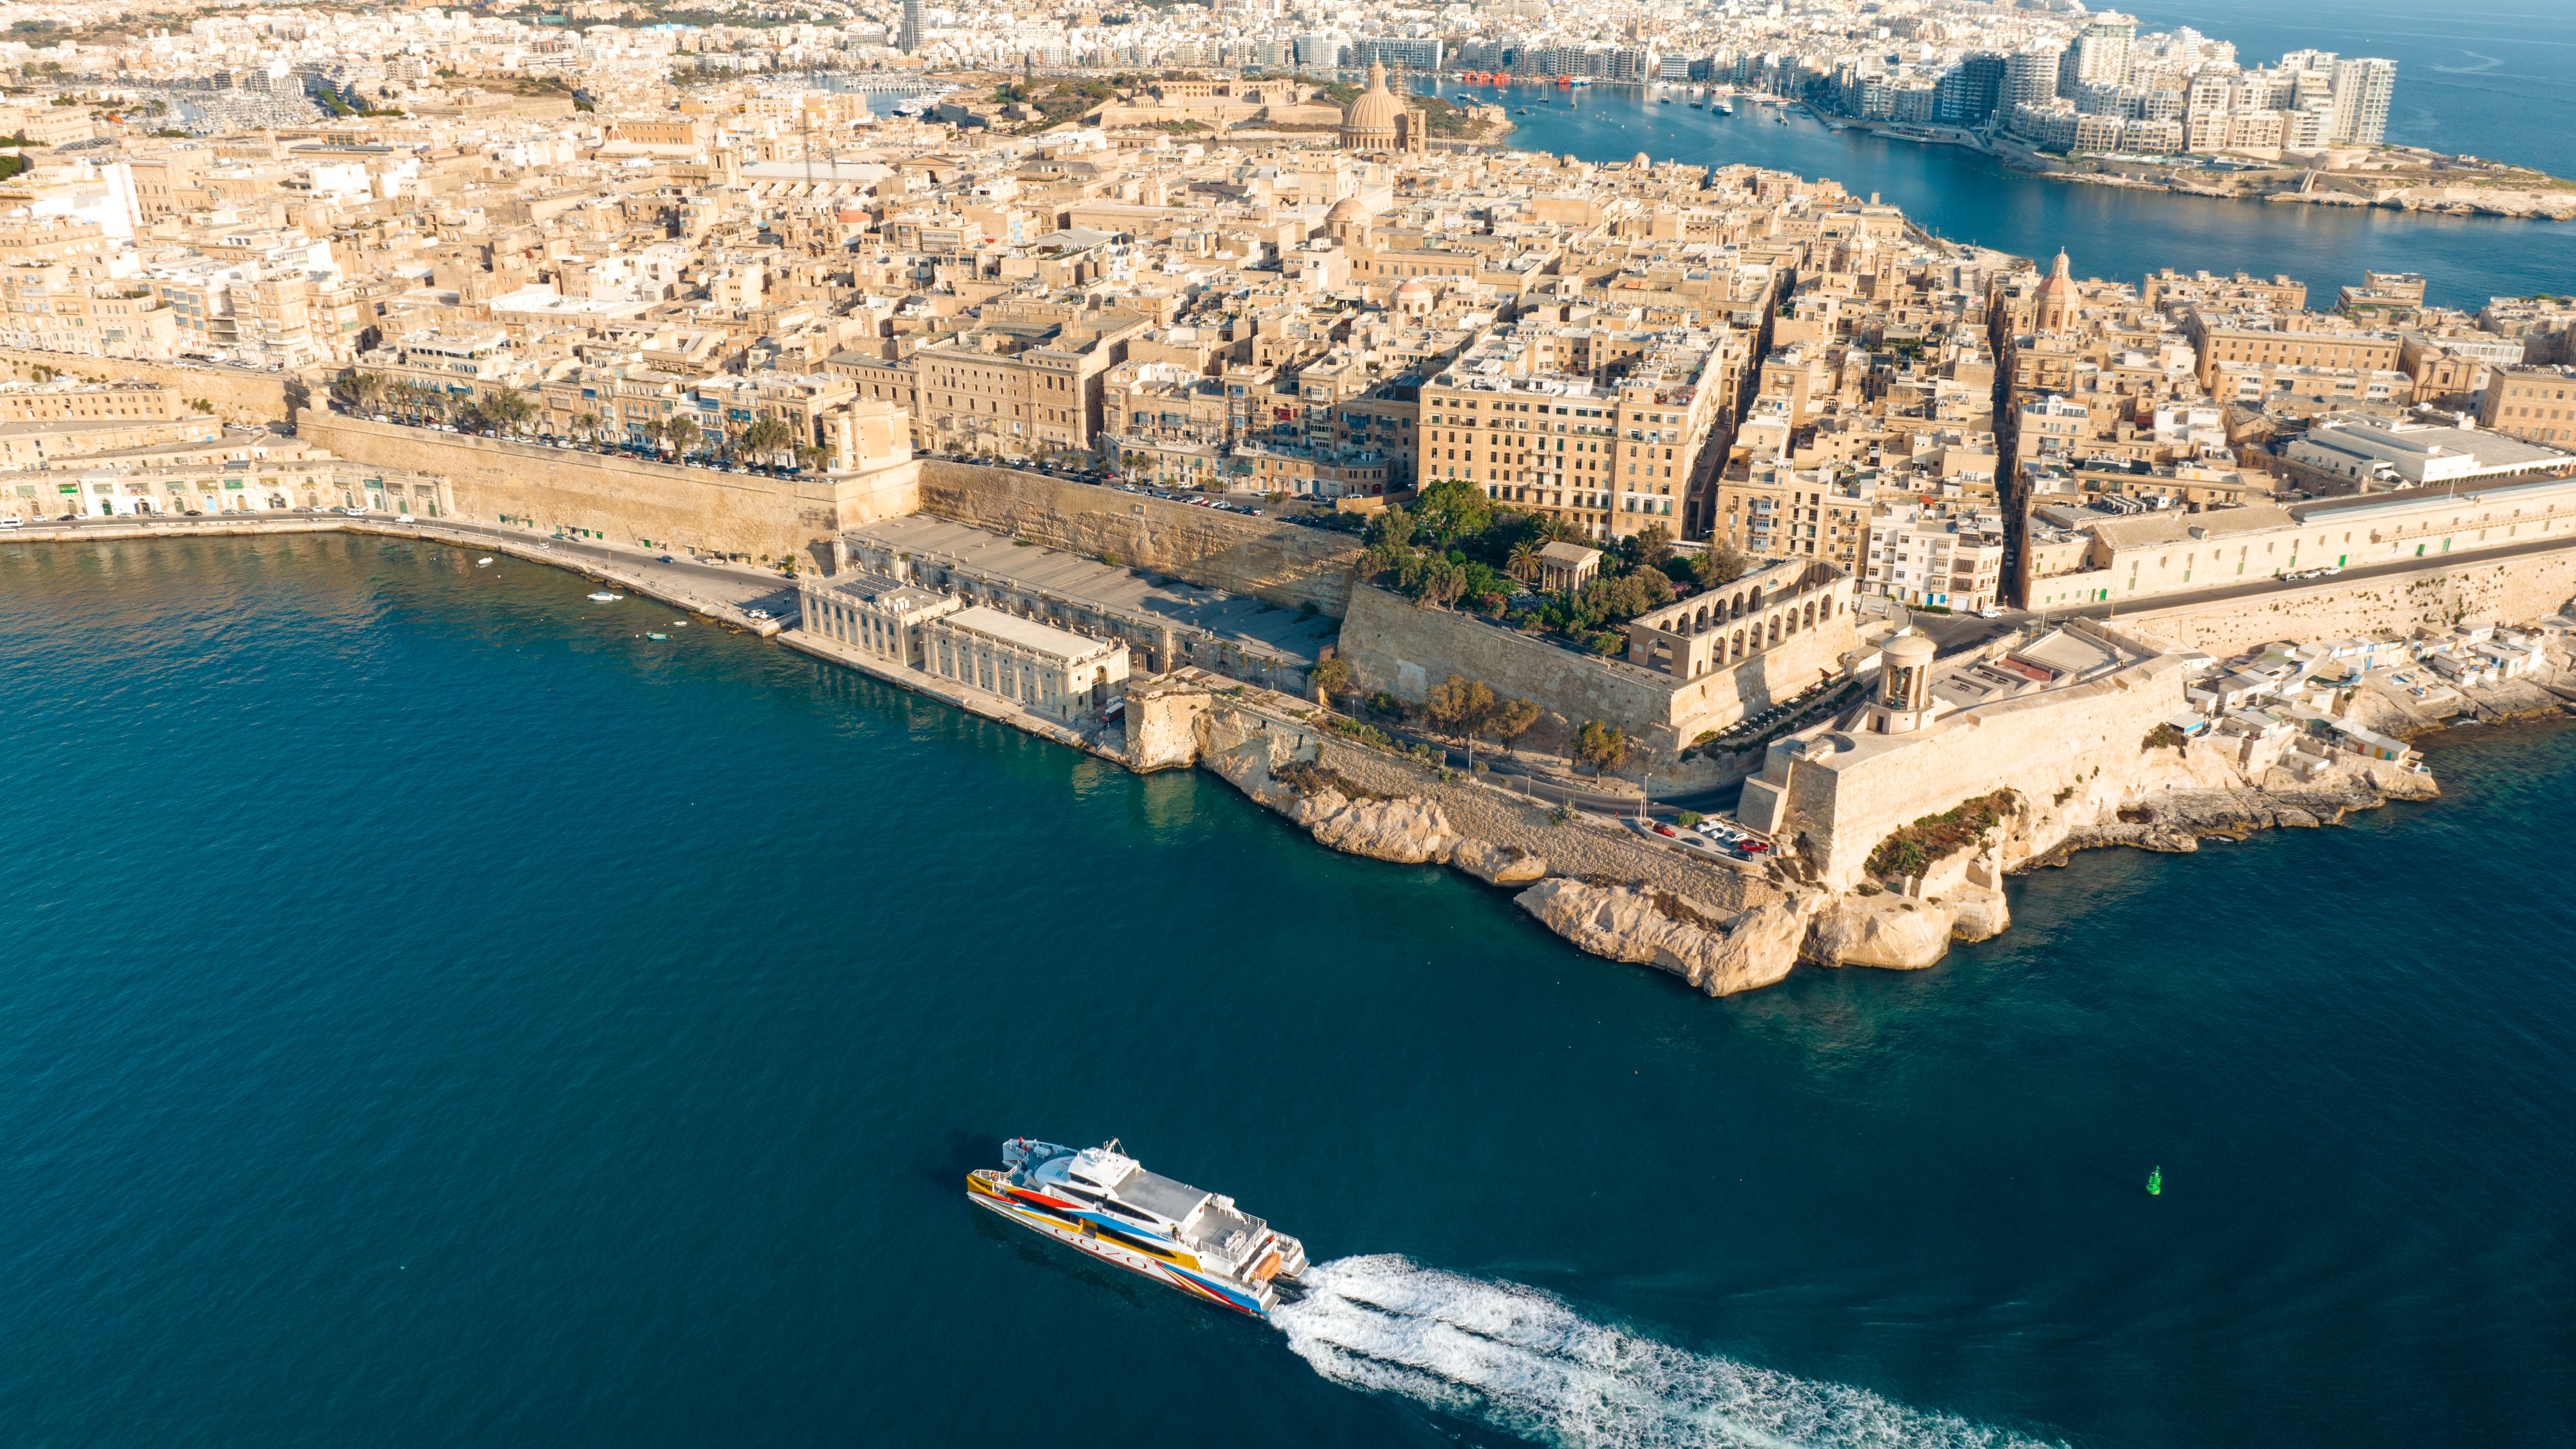 Malta is set to host its first biennale between March and May 2024